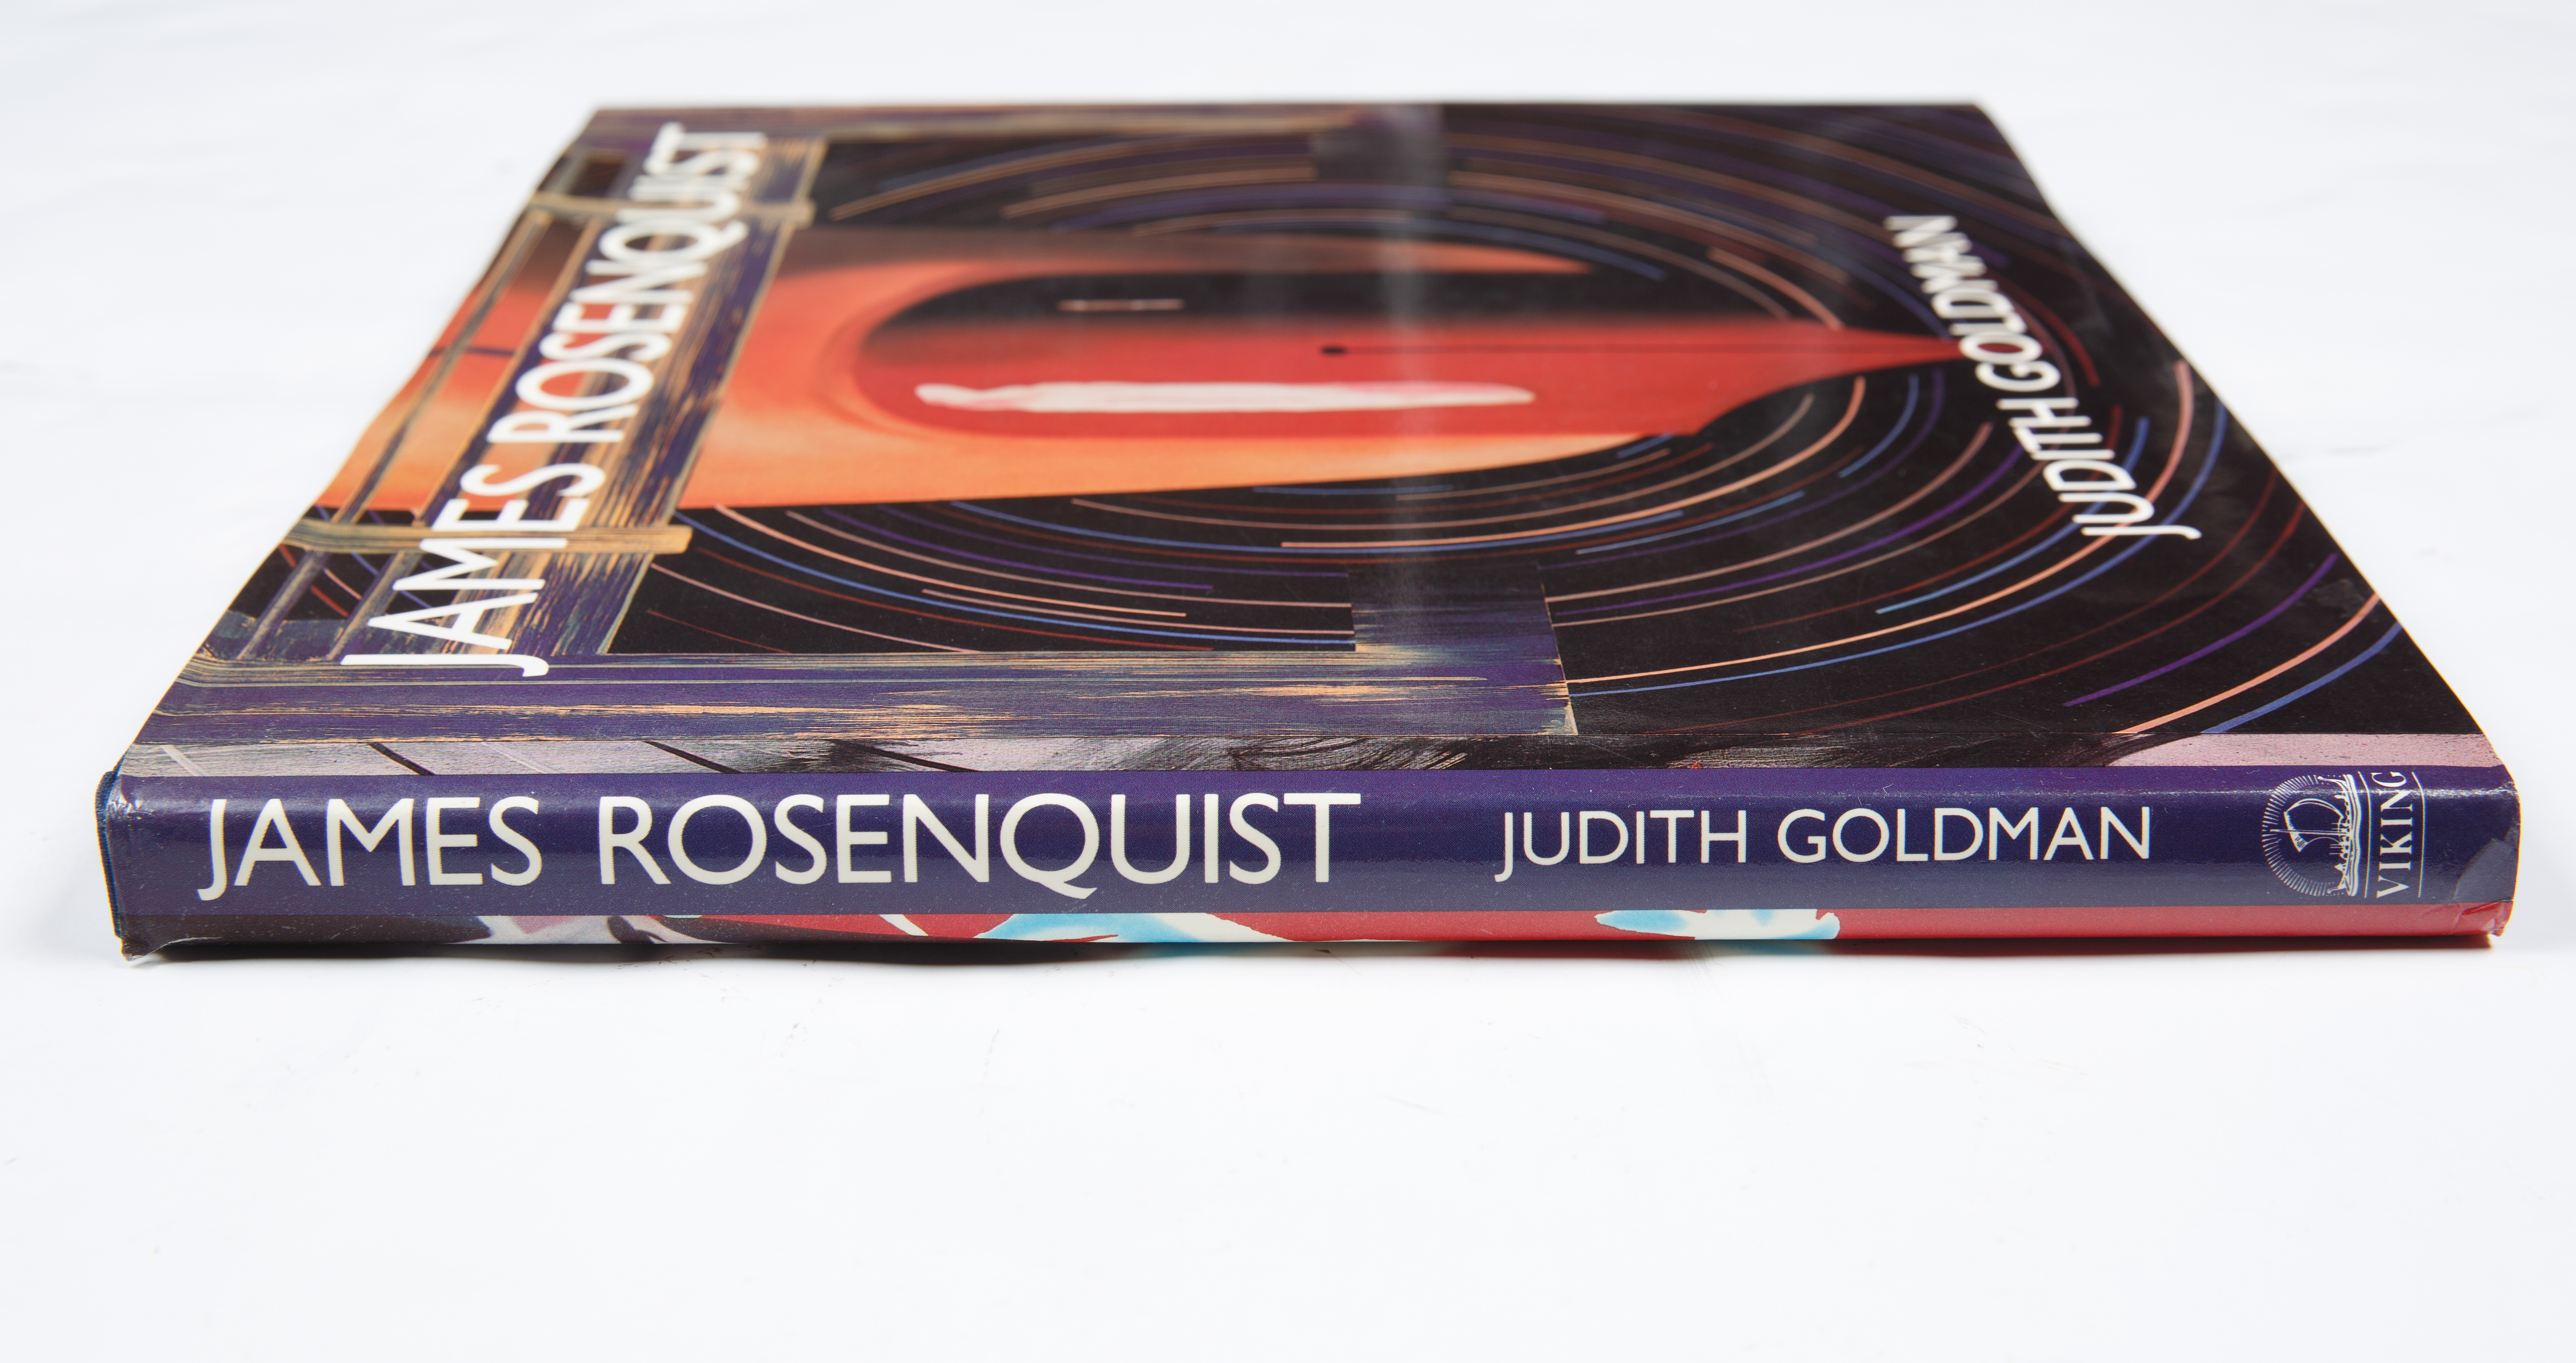 A SIGNED BOOK BY JAMES ROSENQUIST (AMERICAN 1933-2017) - Image 3 of 4